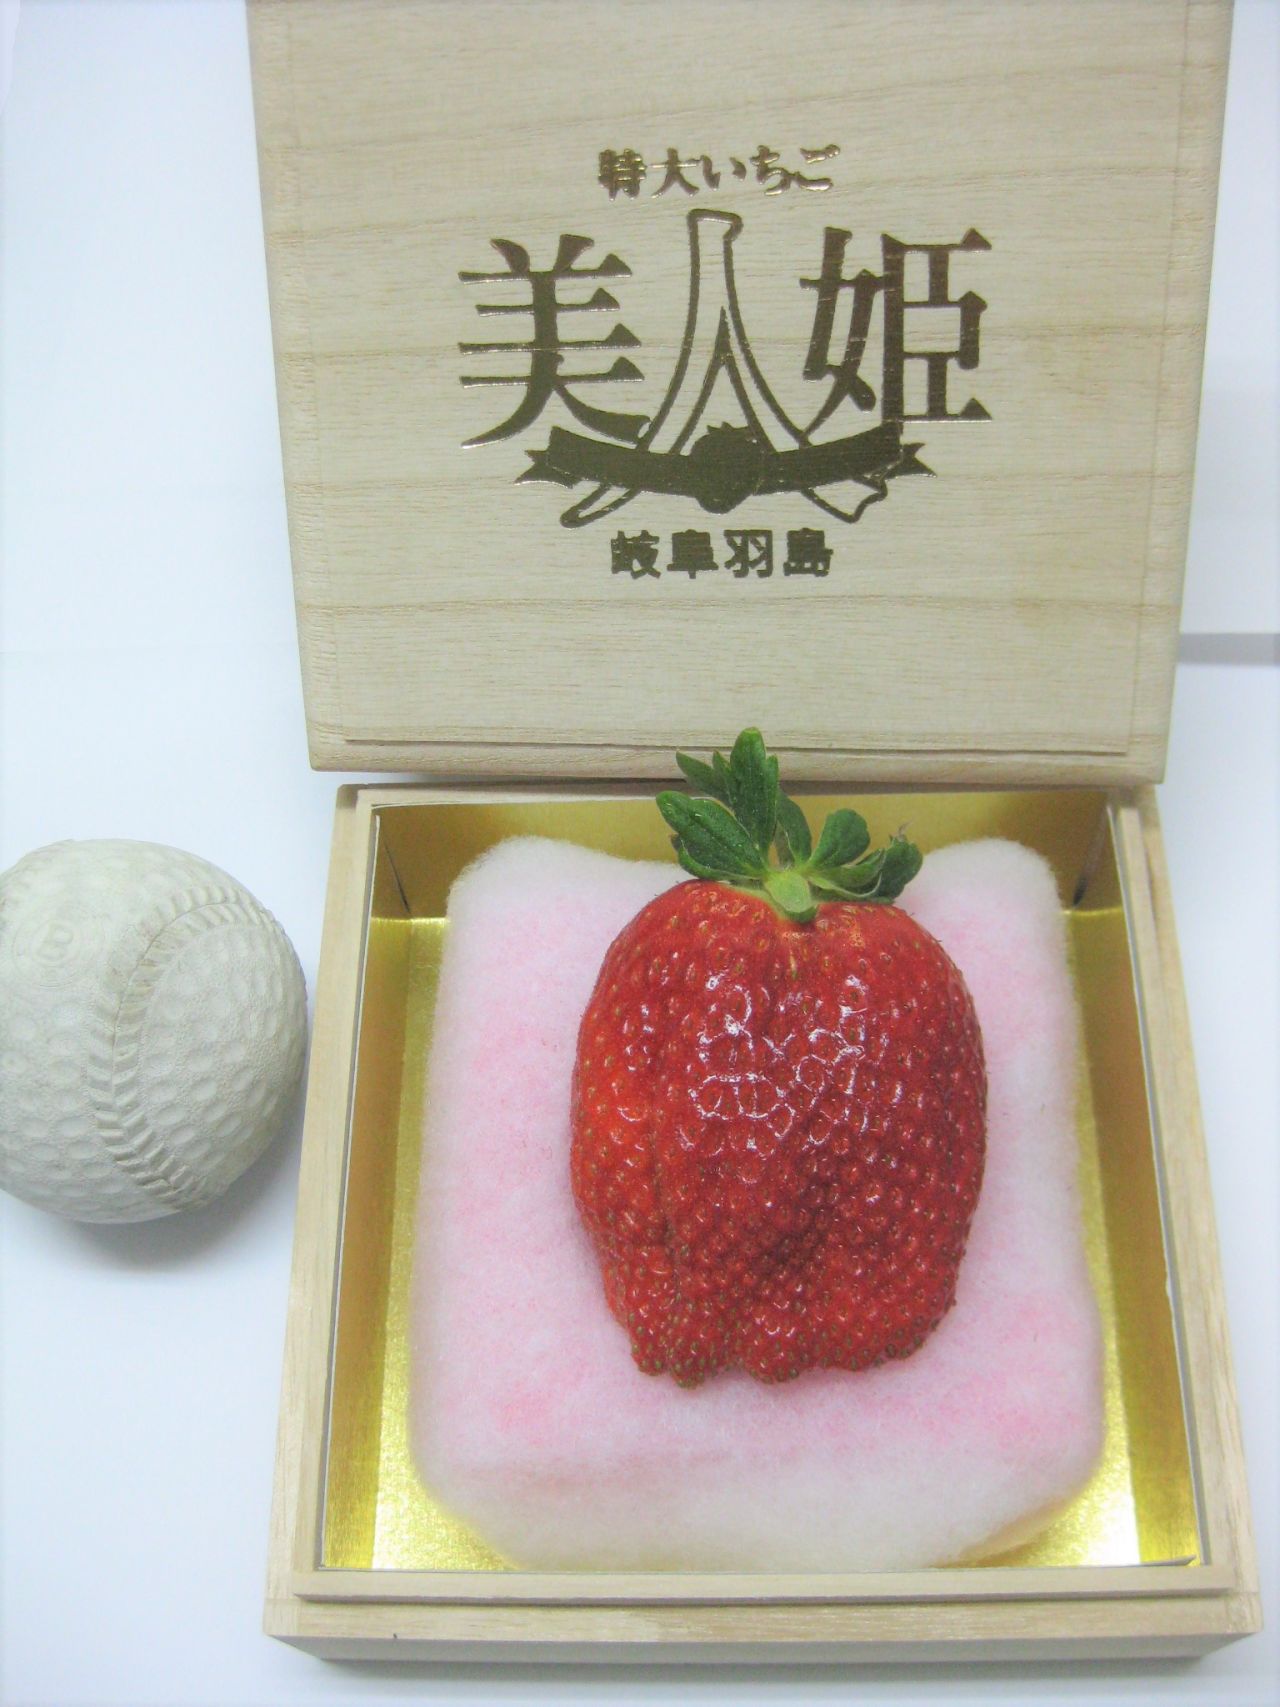 These tennis-ball sized Bijin-hime strawberries usually sell for around 500,000 yen ($4,395) each